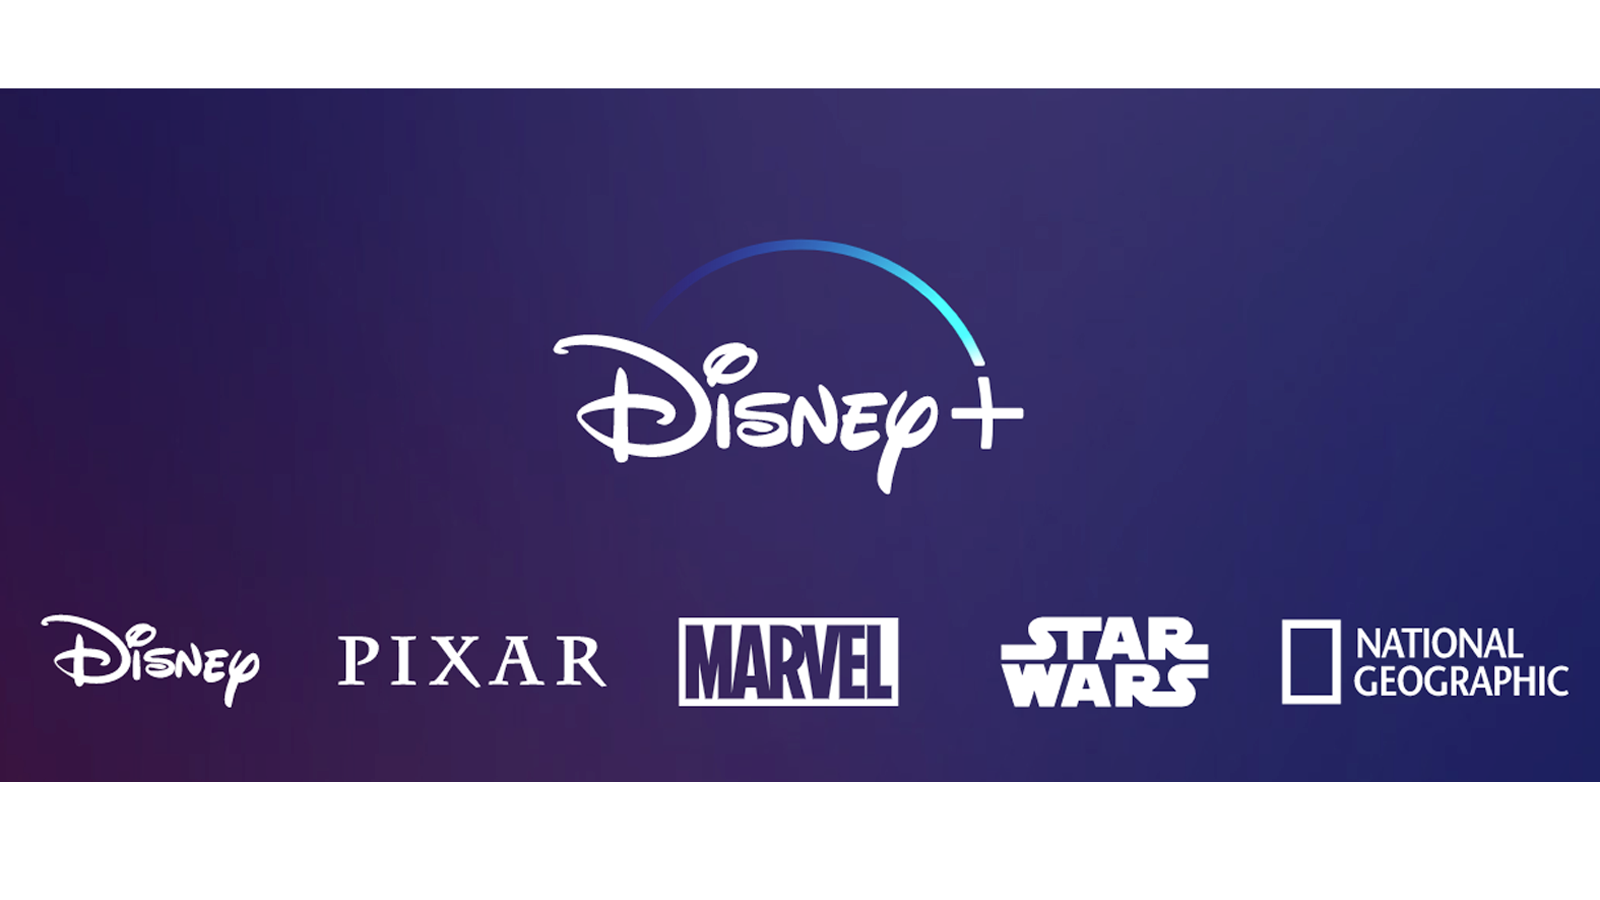 Disney Plus: Price, catalog and how to subscribe